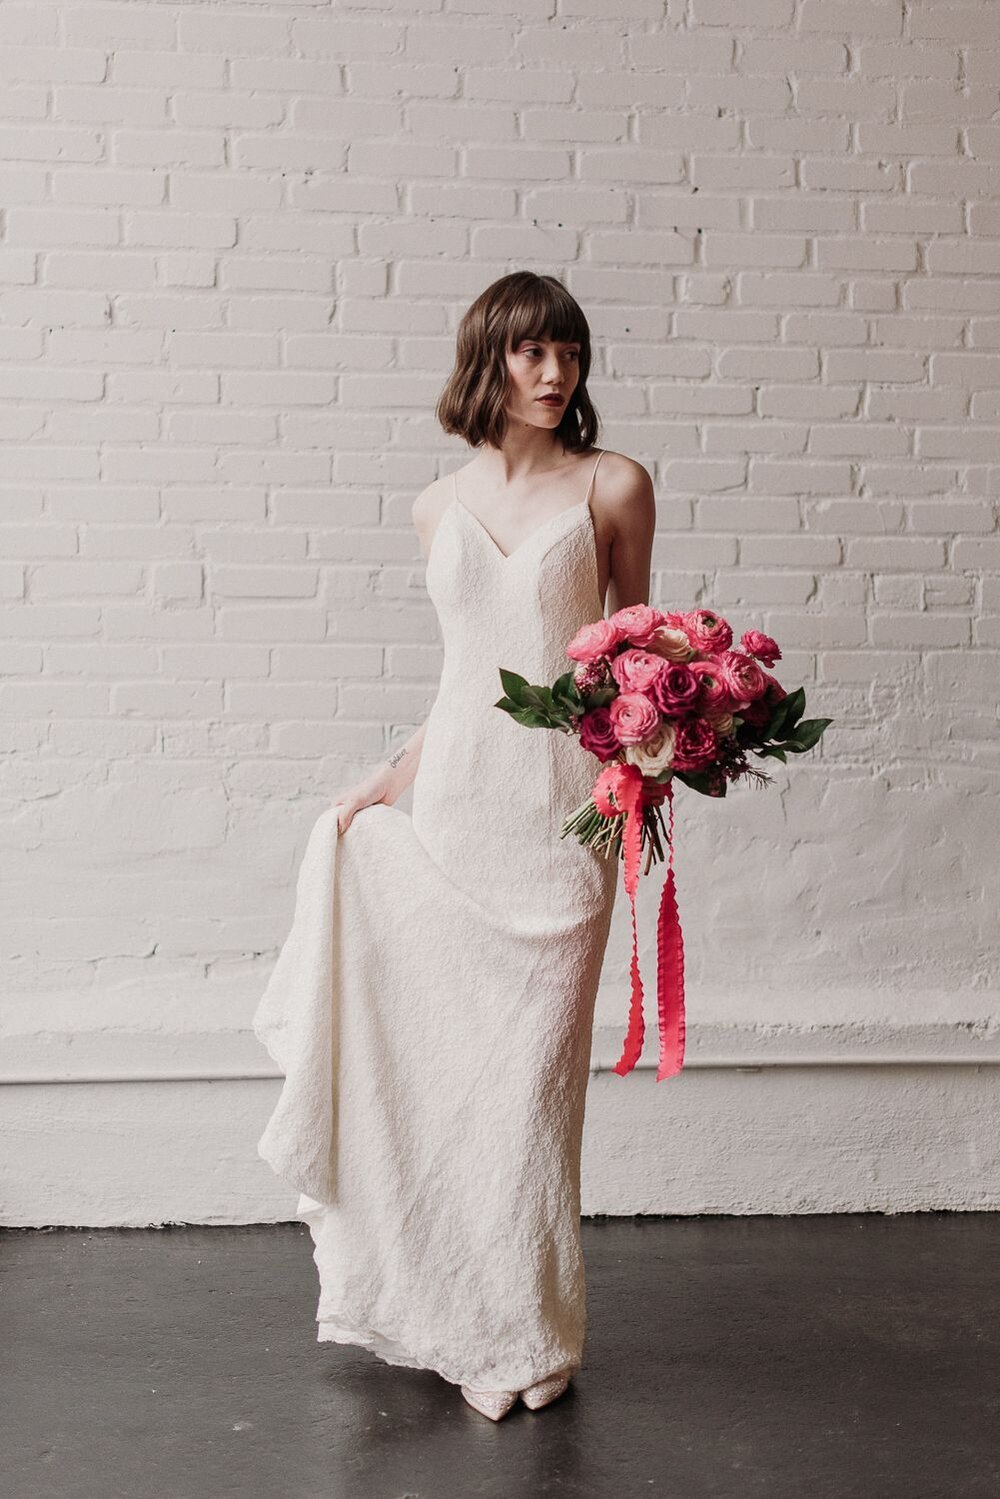 Guide to Shopping for a Wedding Dress Online